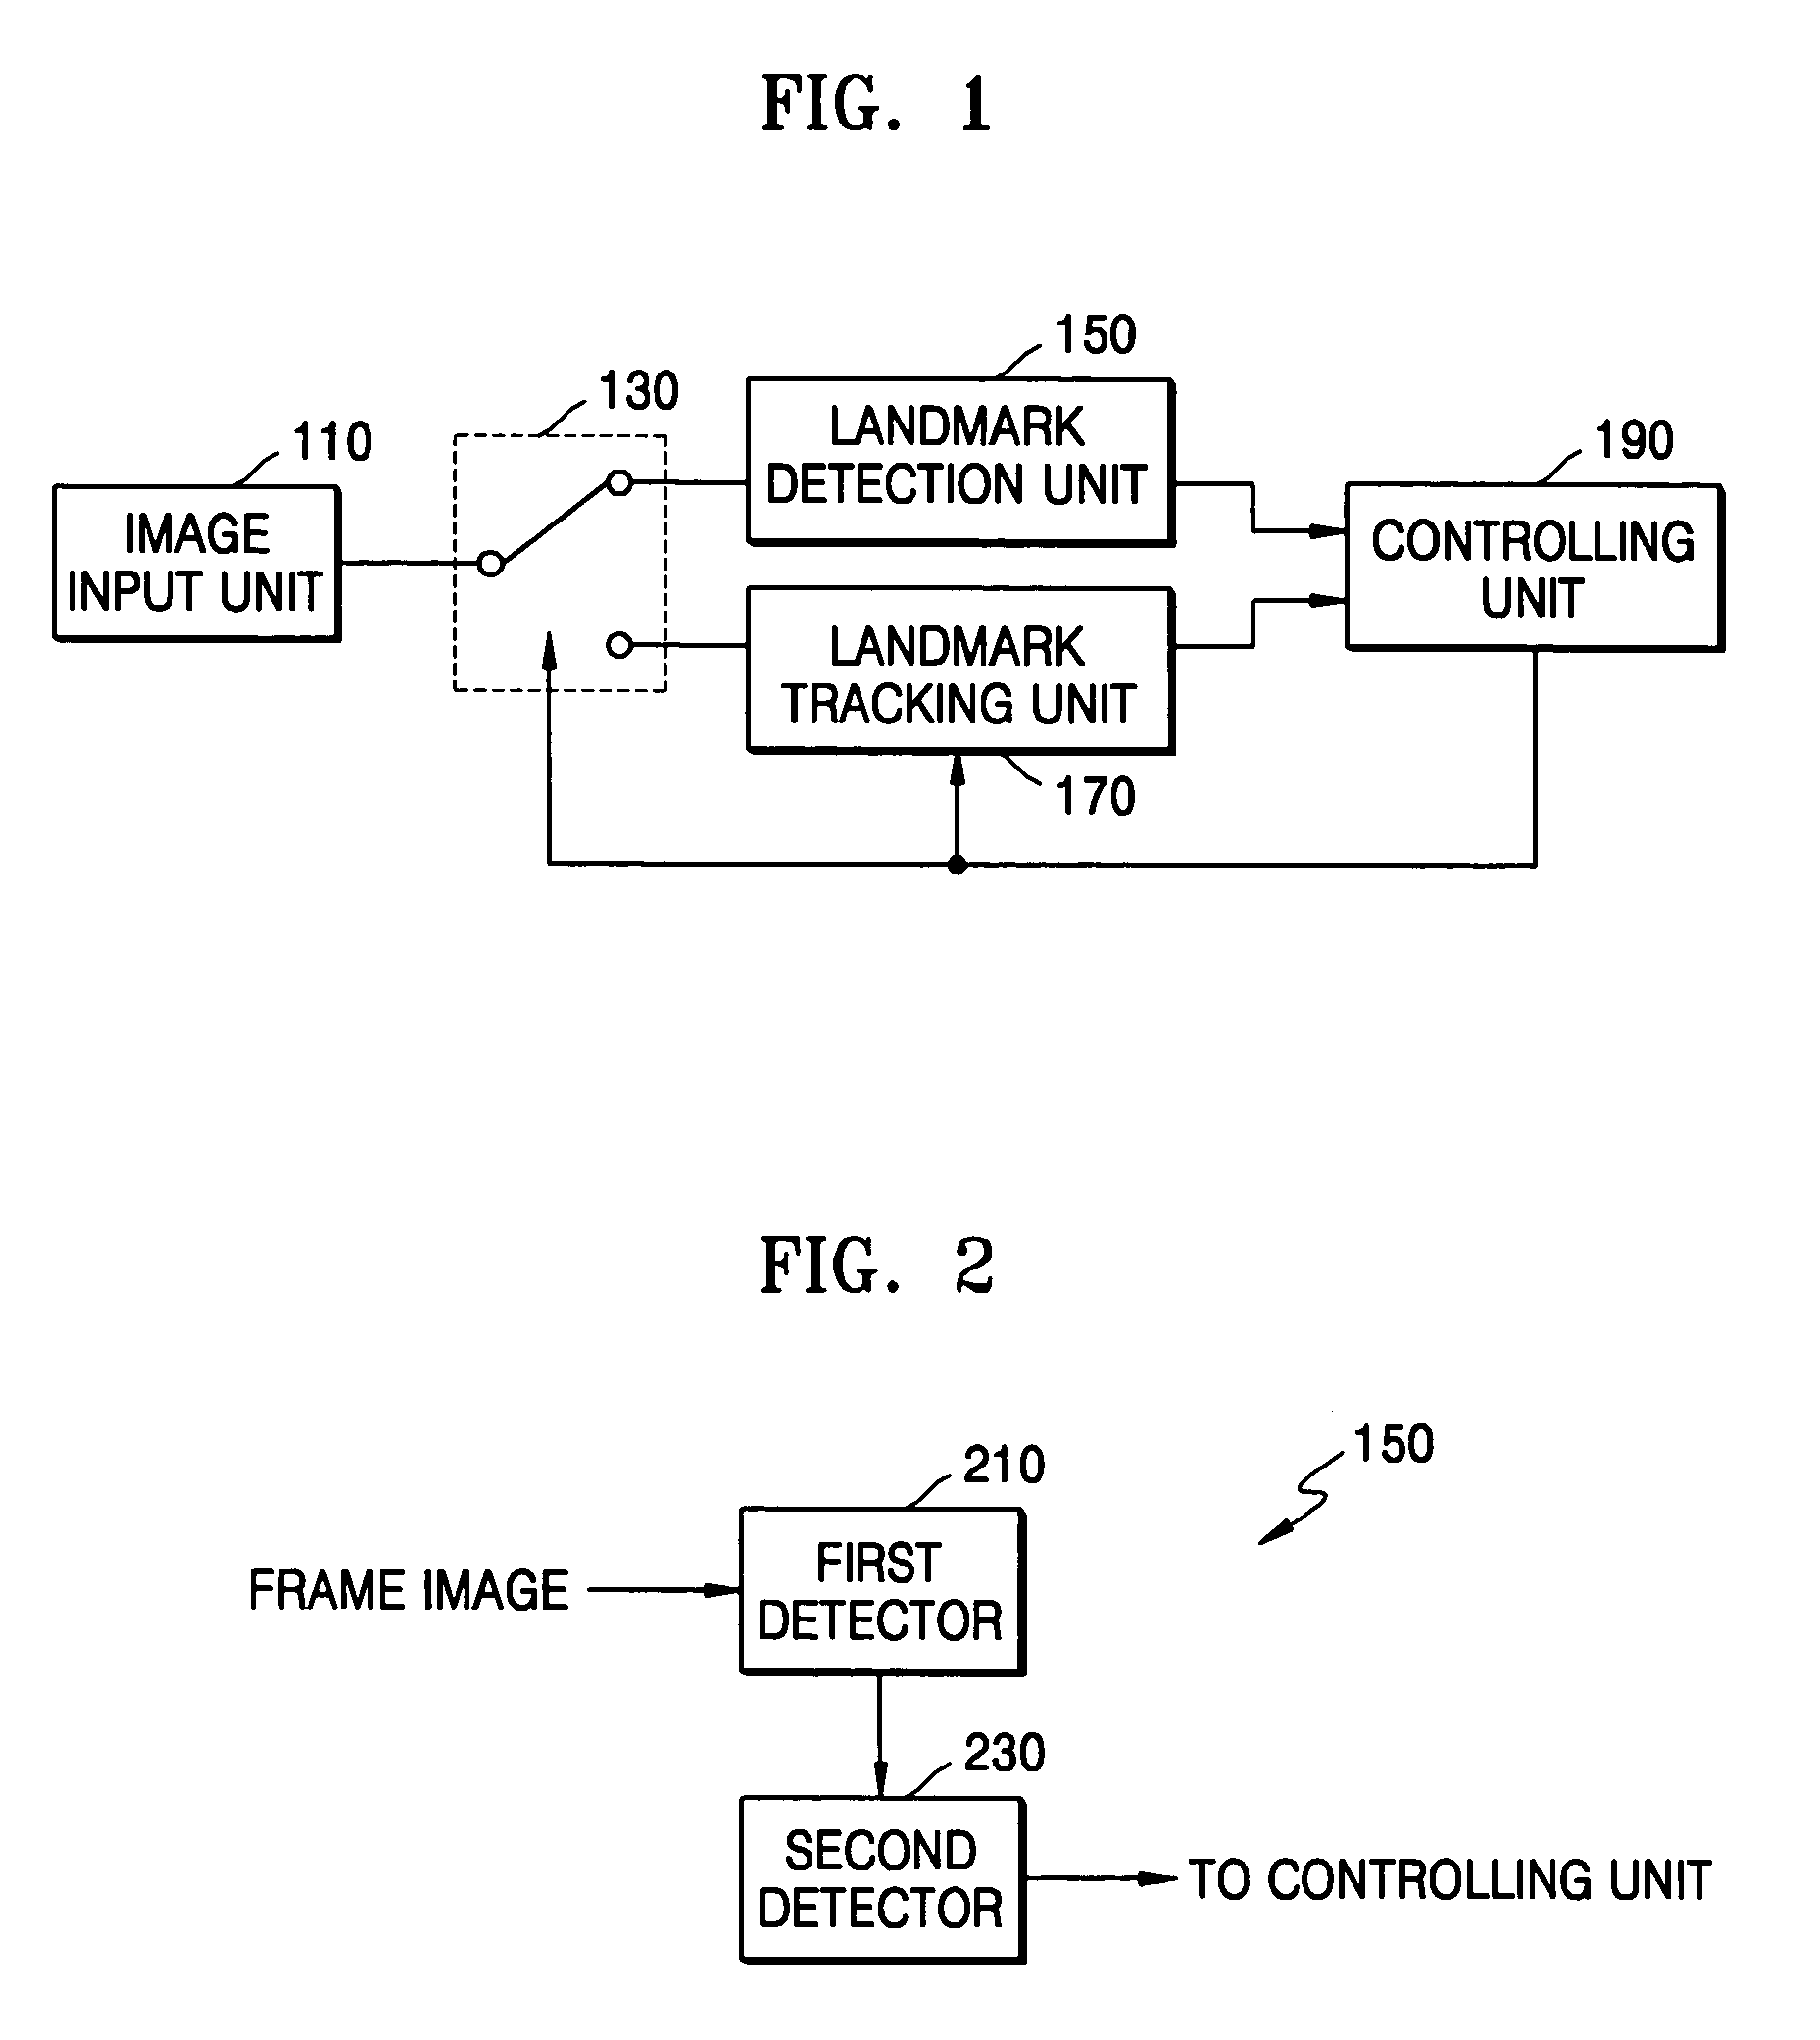 Landmark detection apparatus and method for intelligent system